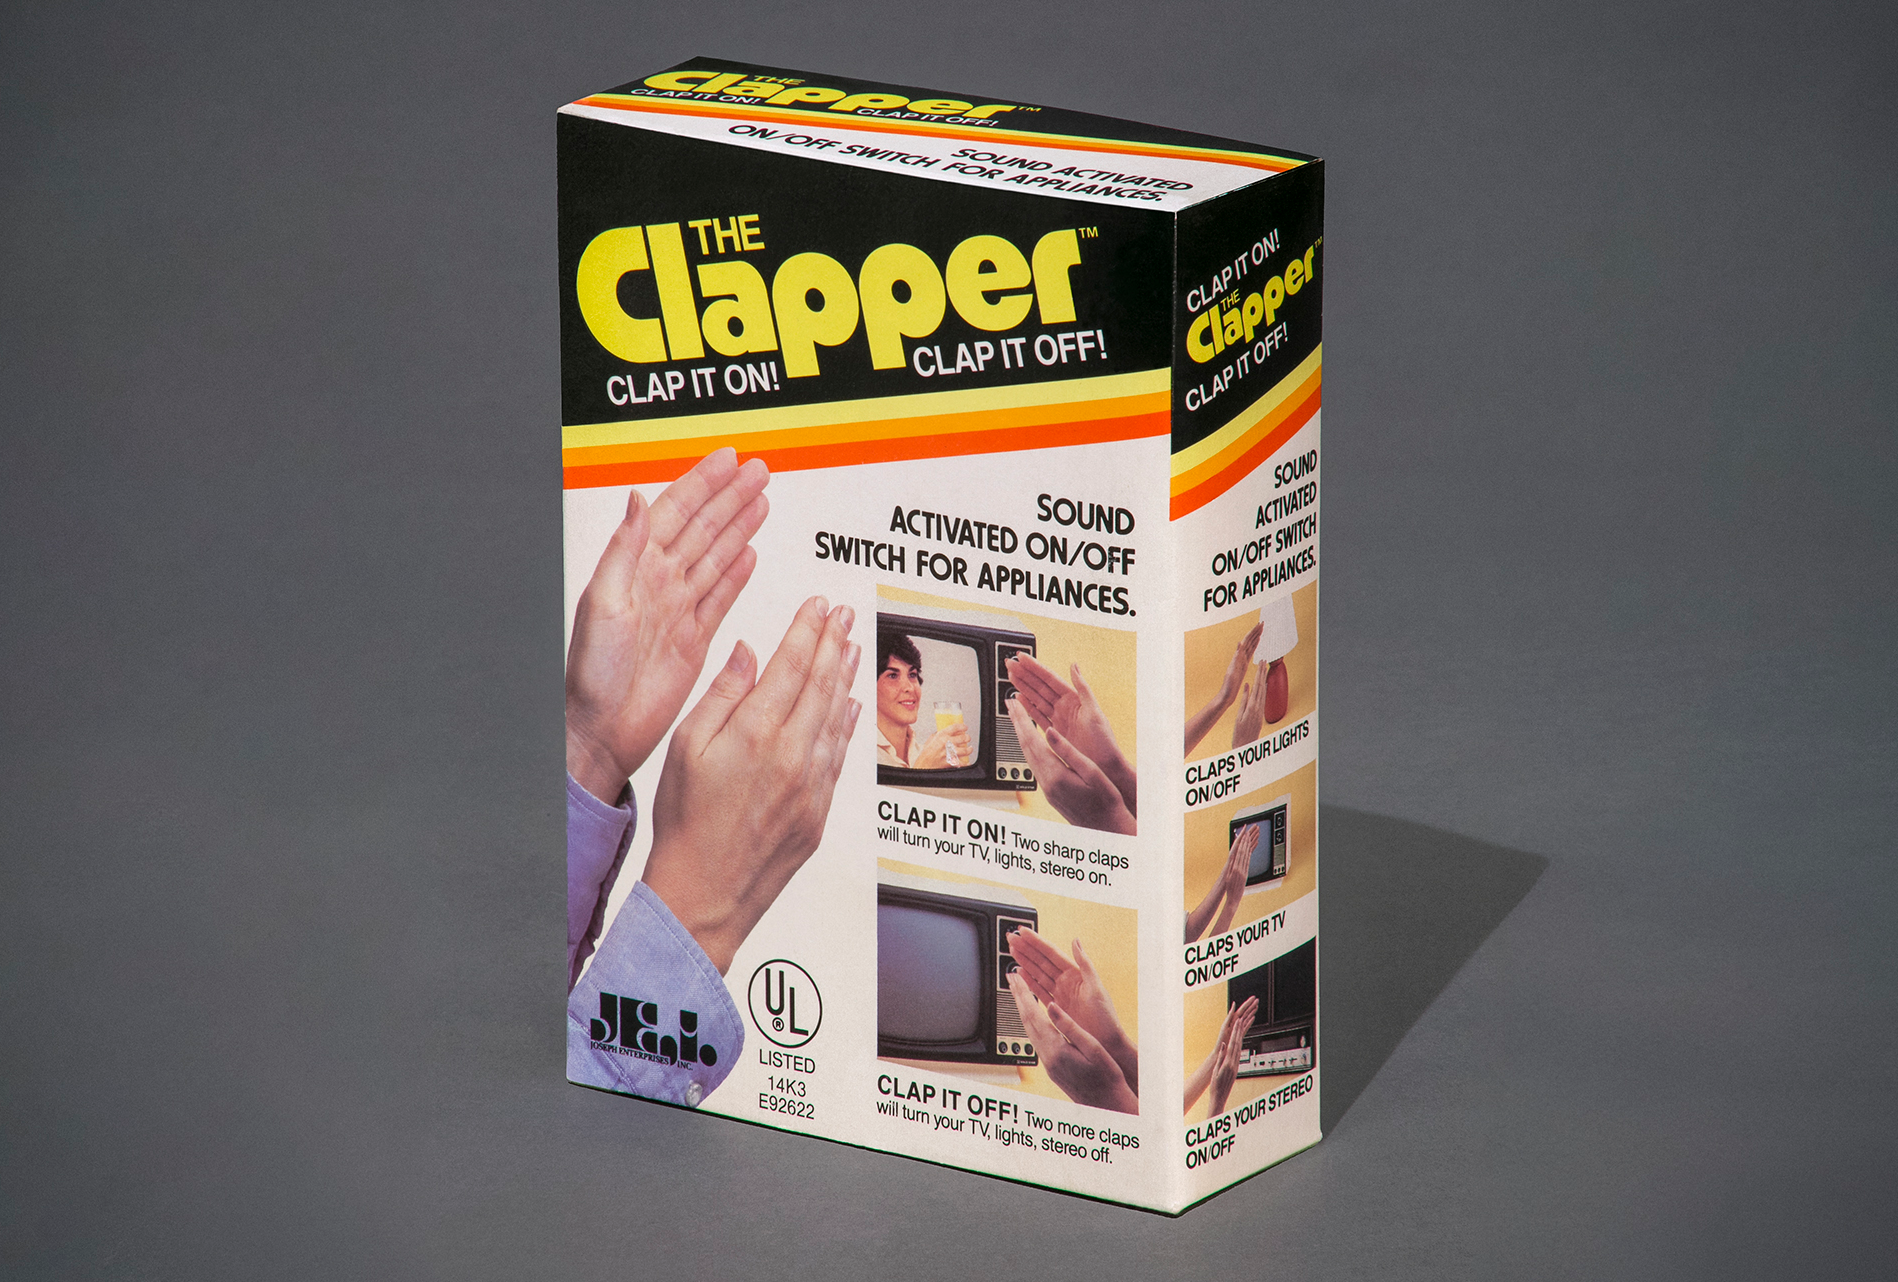 The Cheesy Charm of the Clapper - IEEE Spectrum